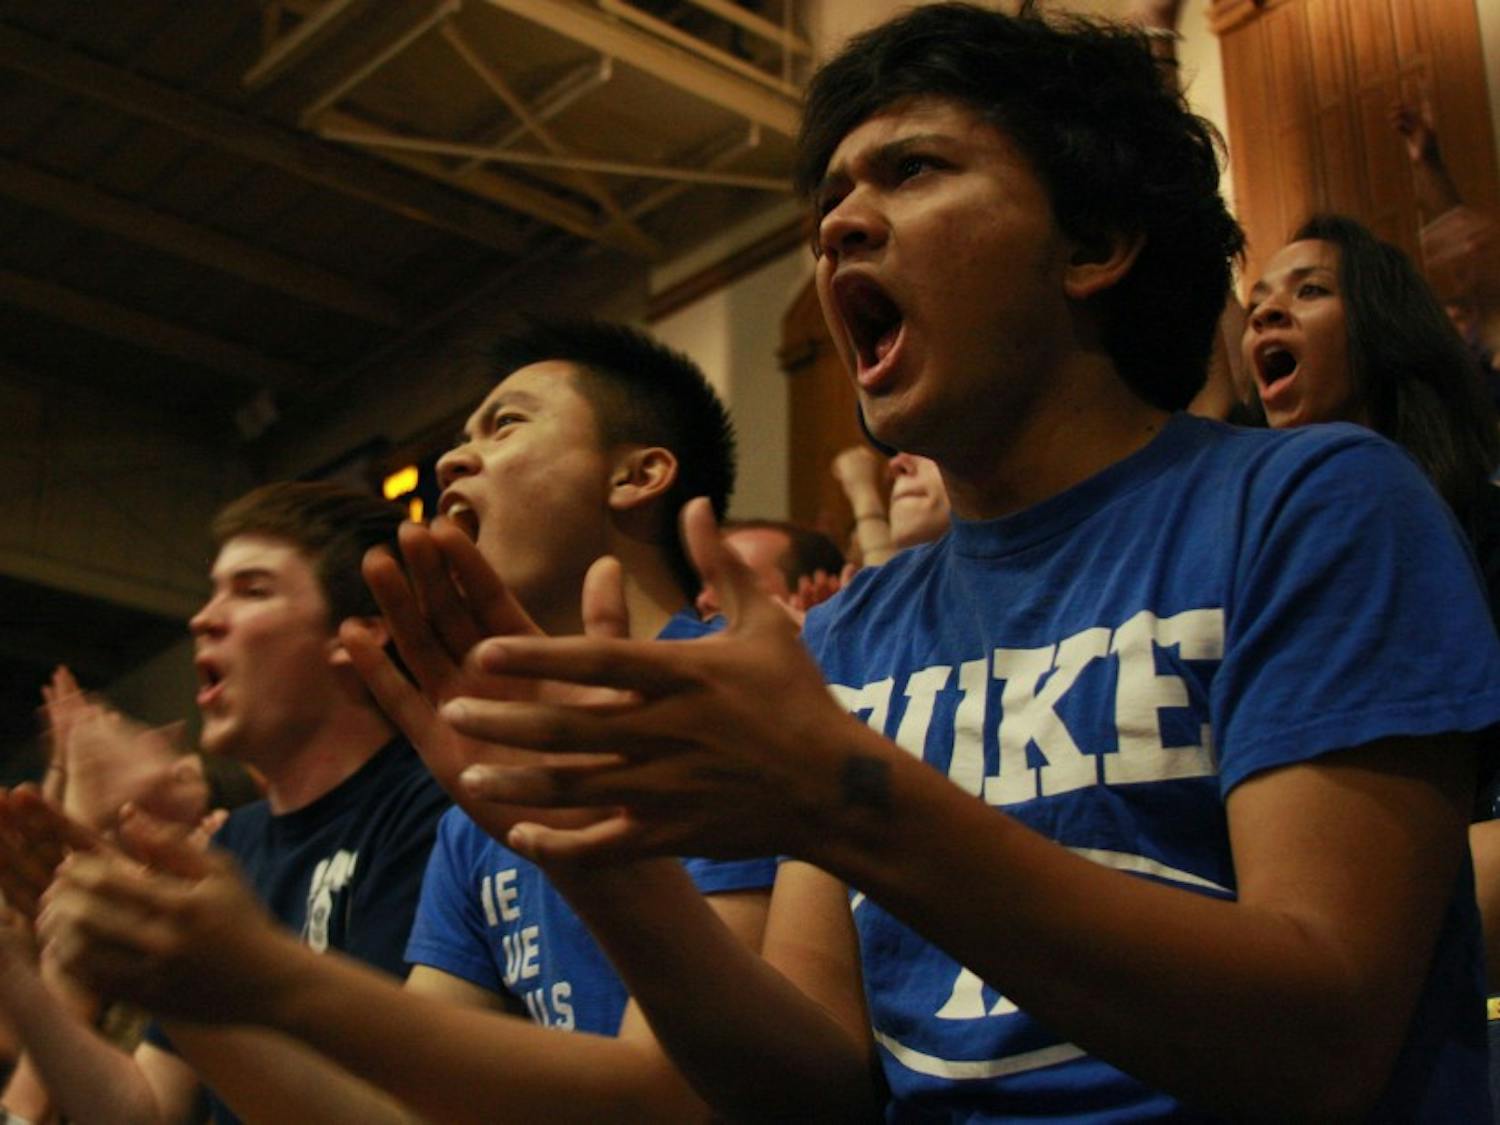 Students watched the 2010 National Championship game in Cameron Indoor Stadium, which will also be opened to student spectators on Monday night for the 2015 title game.